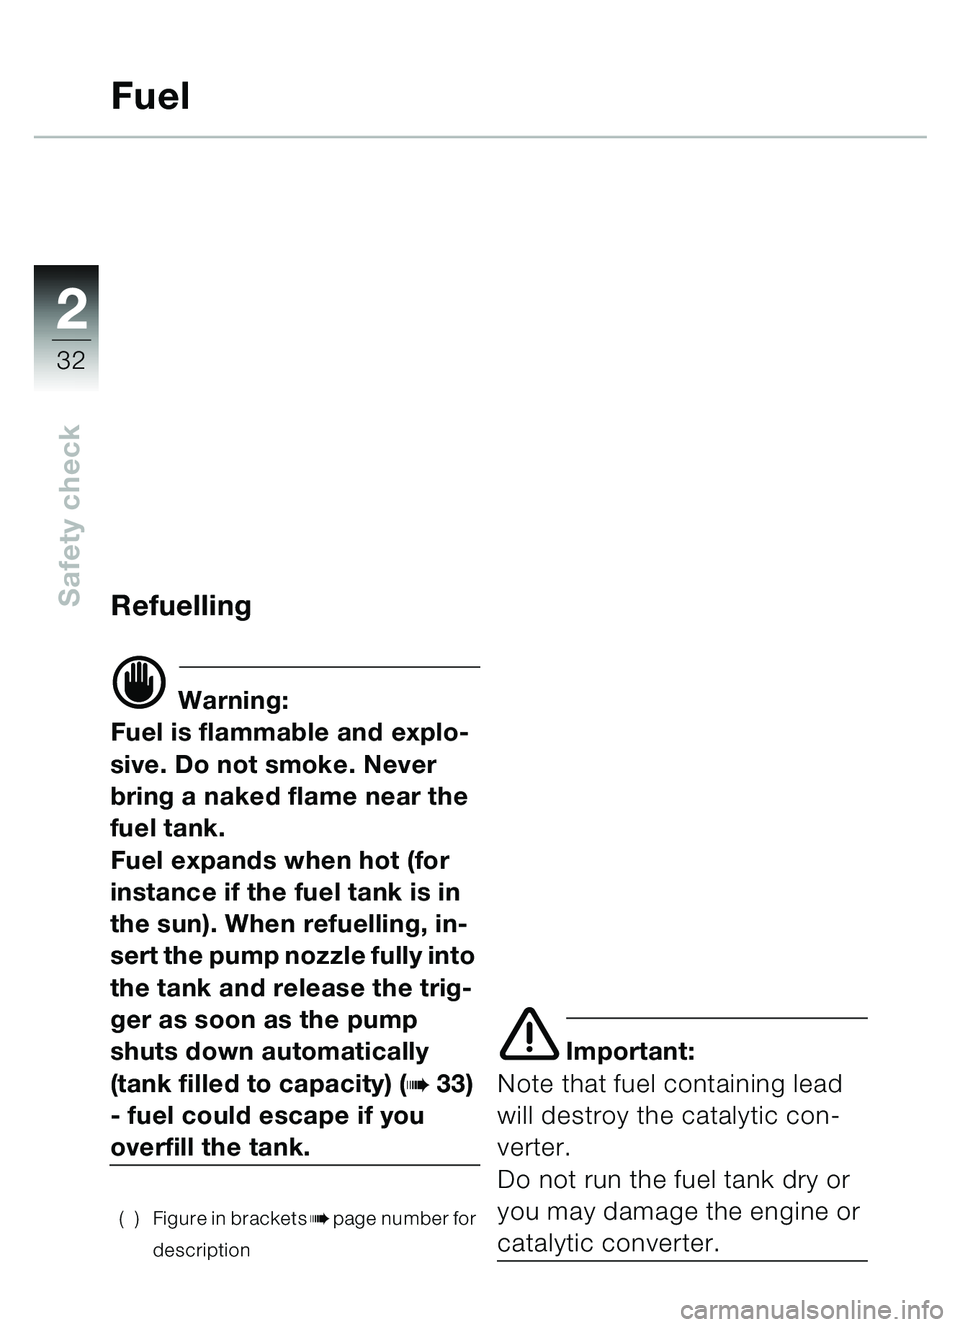 BMW MOTORRAD C1 2000  Riders Manual (in English) 2
32
Safety check
Fuel
Refuelling 
d Warning:
Fuel is flammable and explo-
sive. Do not smoke. Never 
bring a naked flame near the 
fuel tank.
Fuel expands when hot (for 
instance if the fuel tank is 